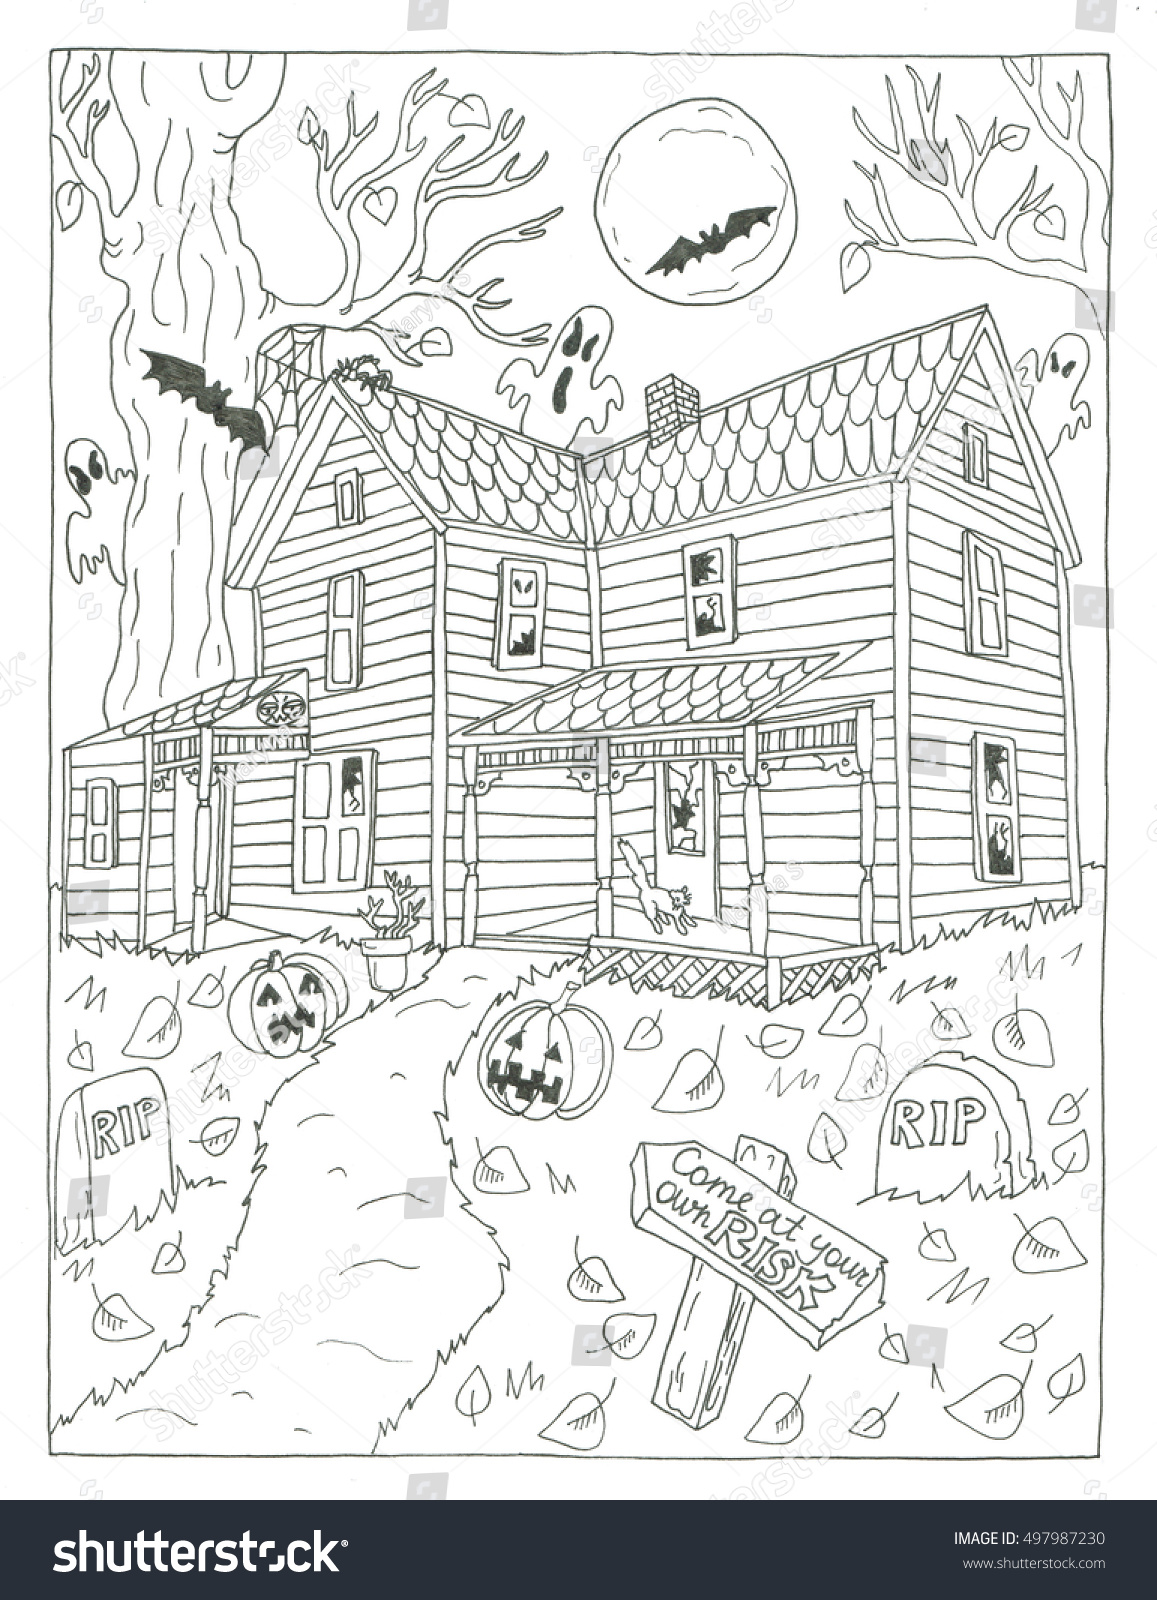 Scary House Halloween Coloring Page Stock Photo 497987230 : Shutterstock